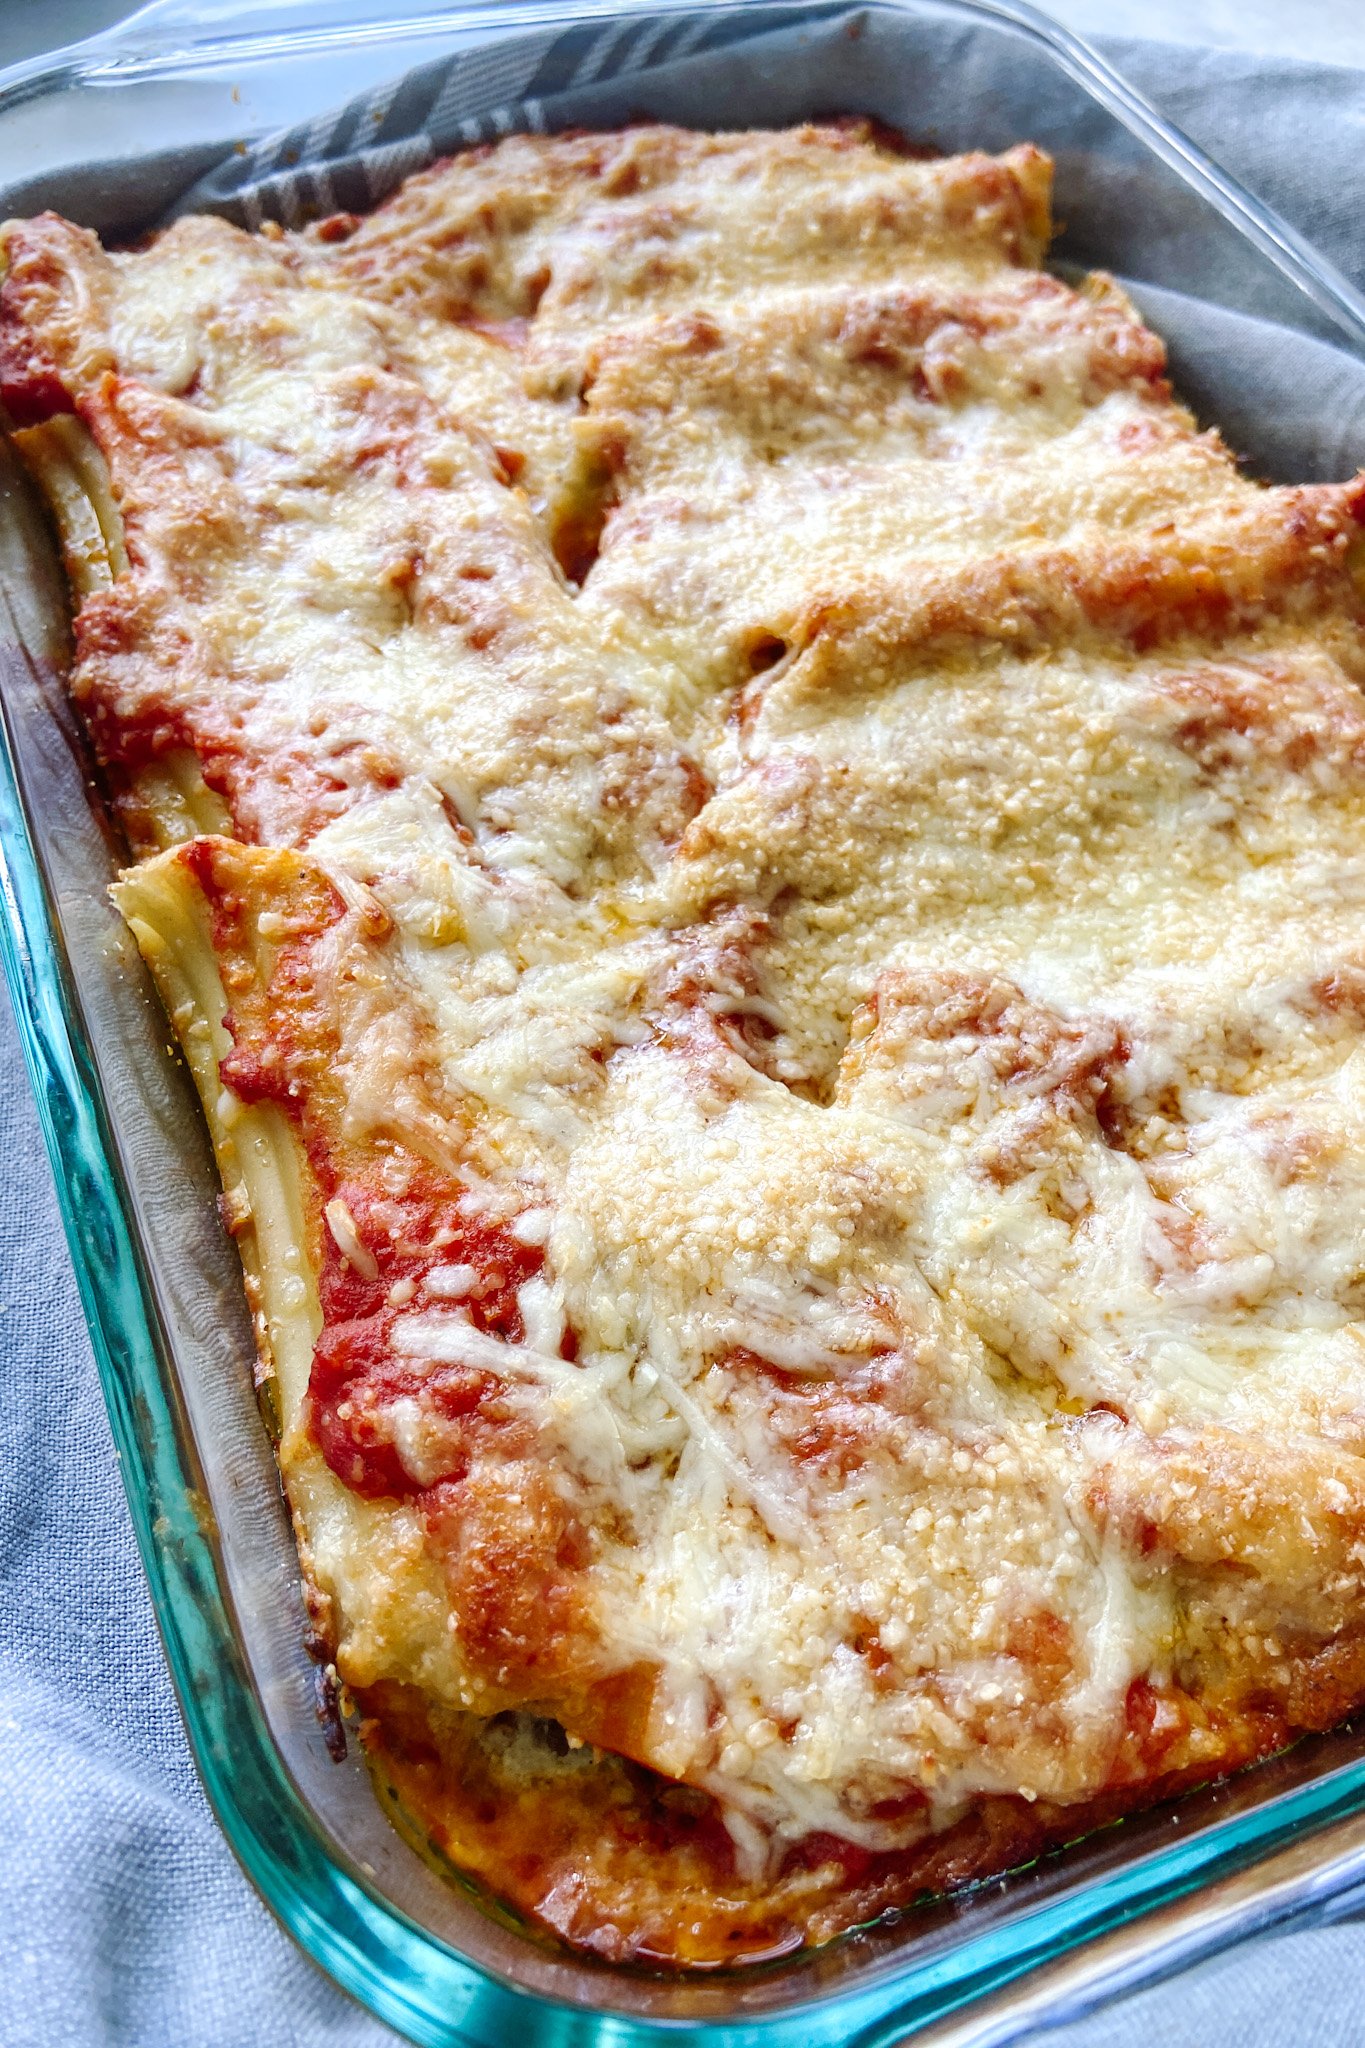 Cheesy beef manicotti fresh out of the oven in a pyrex tray